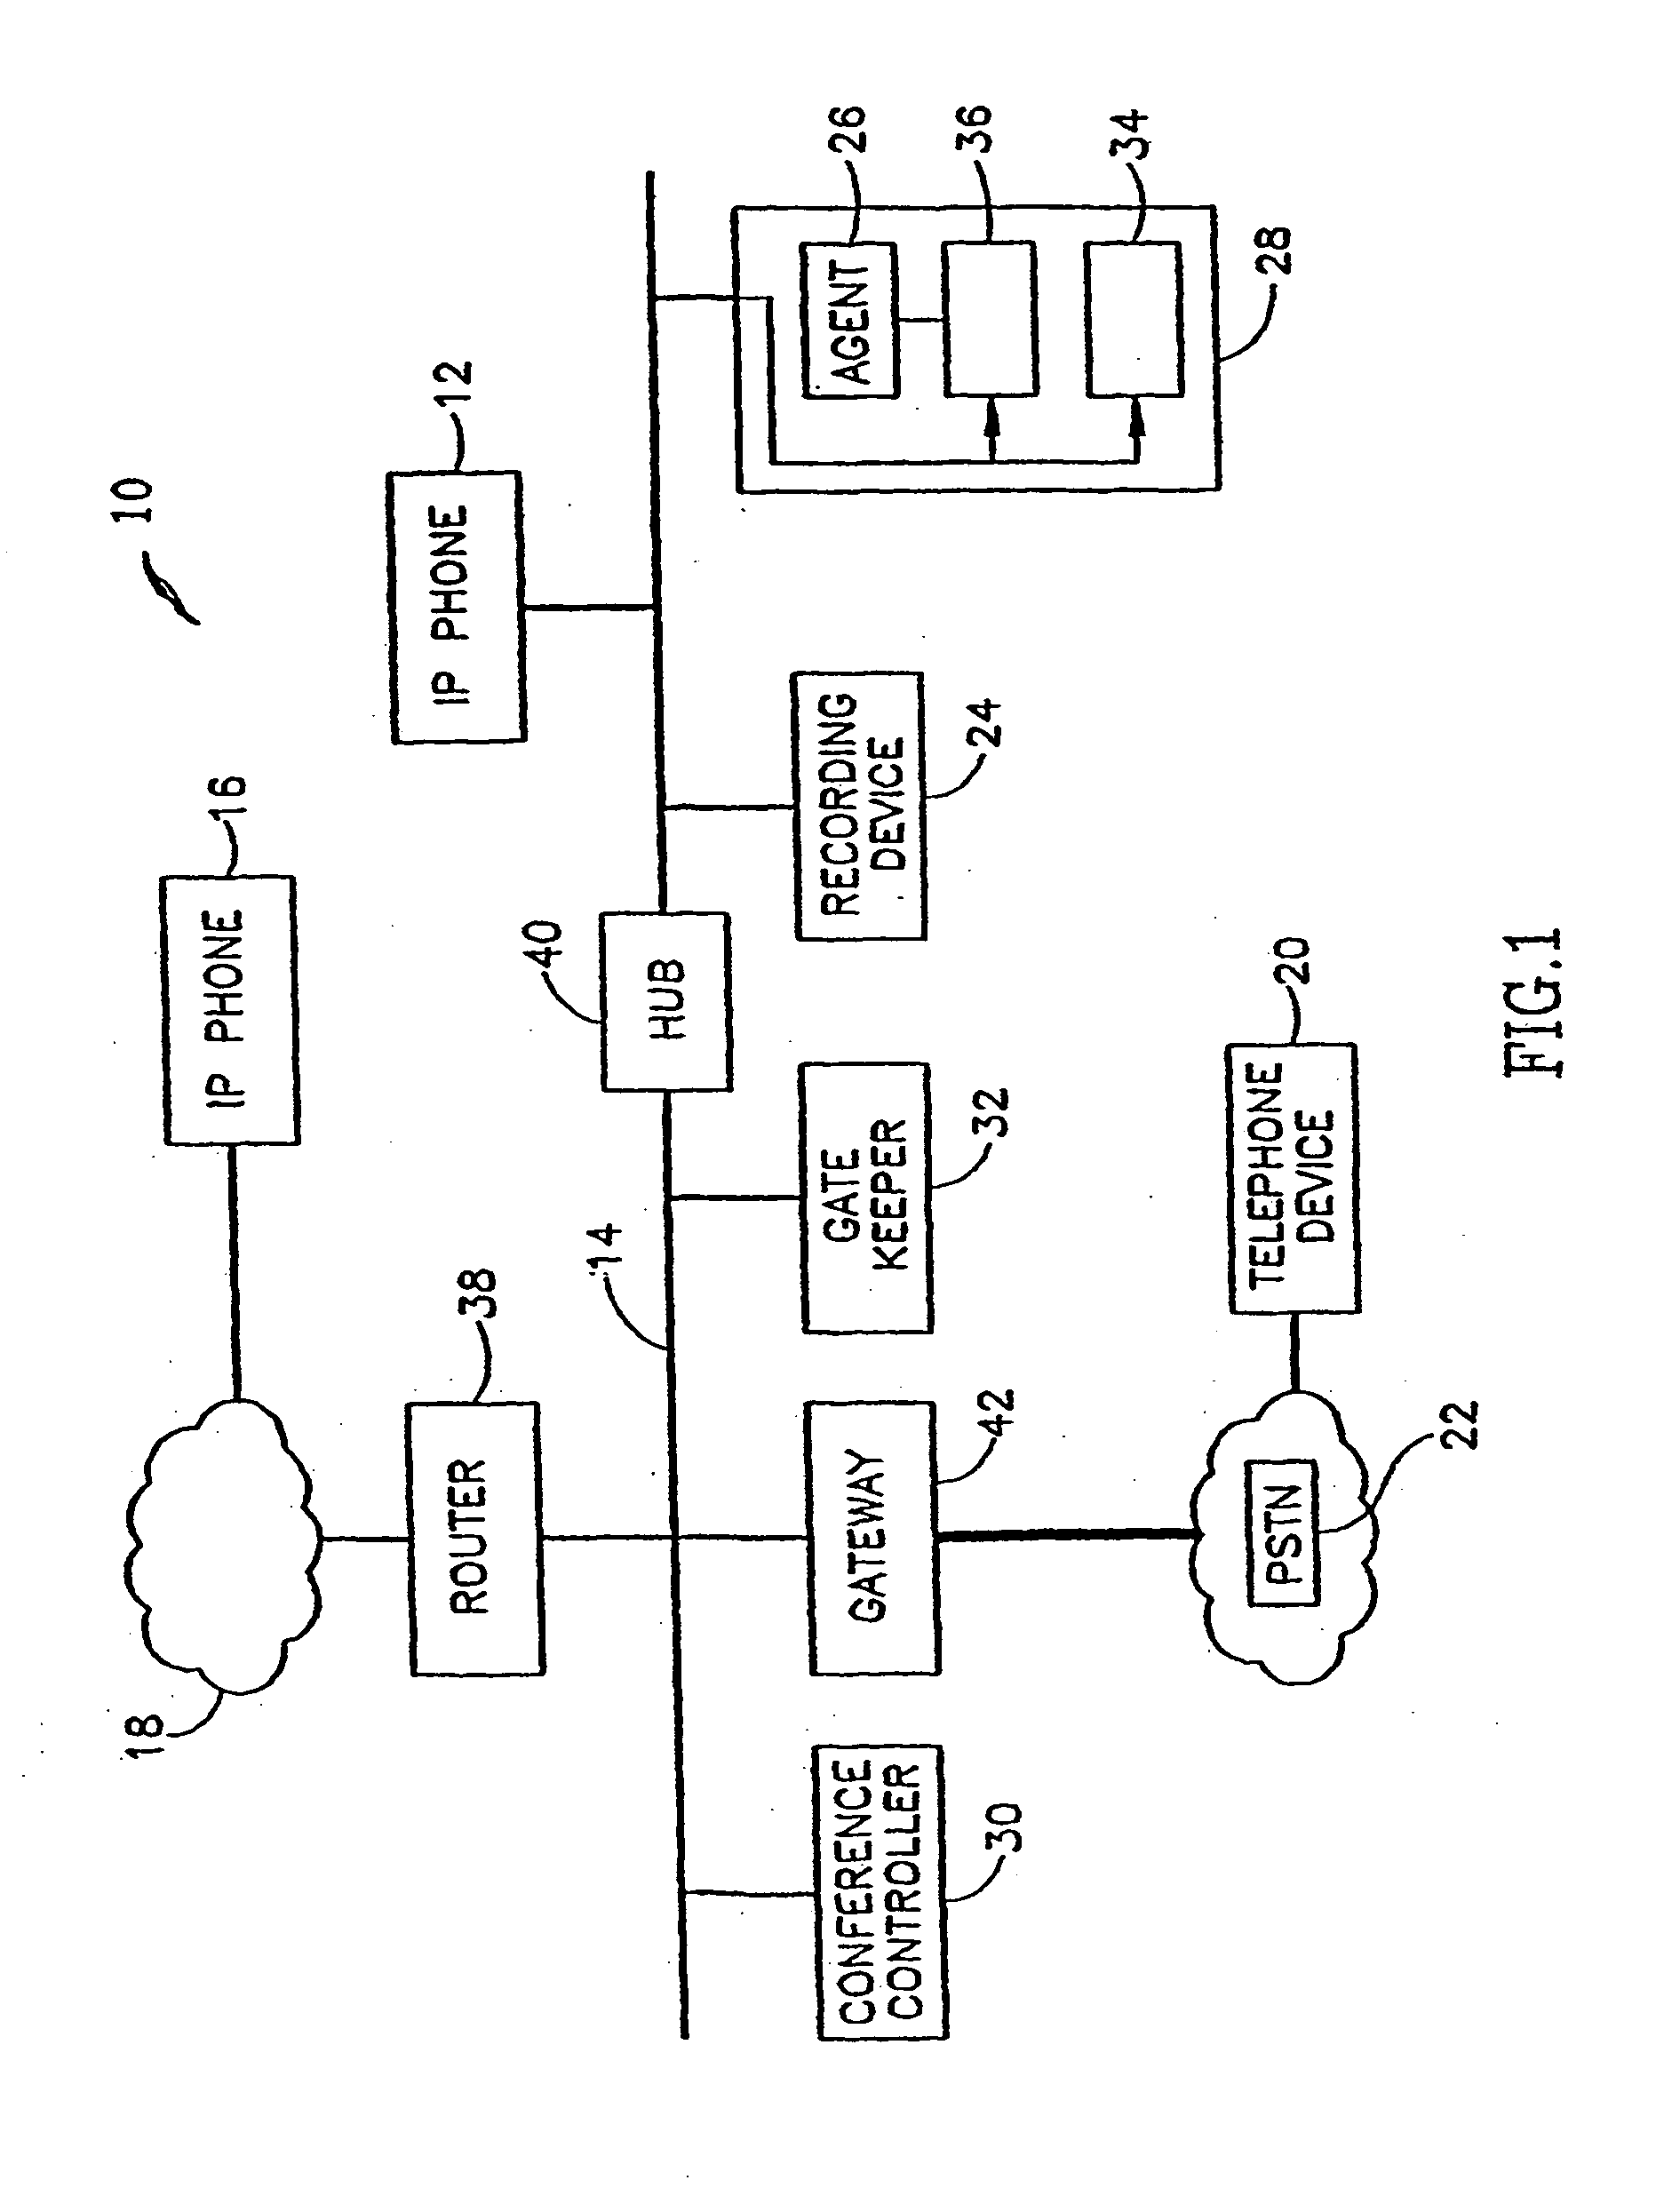 Method for forwarding and storing session packets according to preset and /or dynamic rules